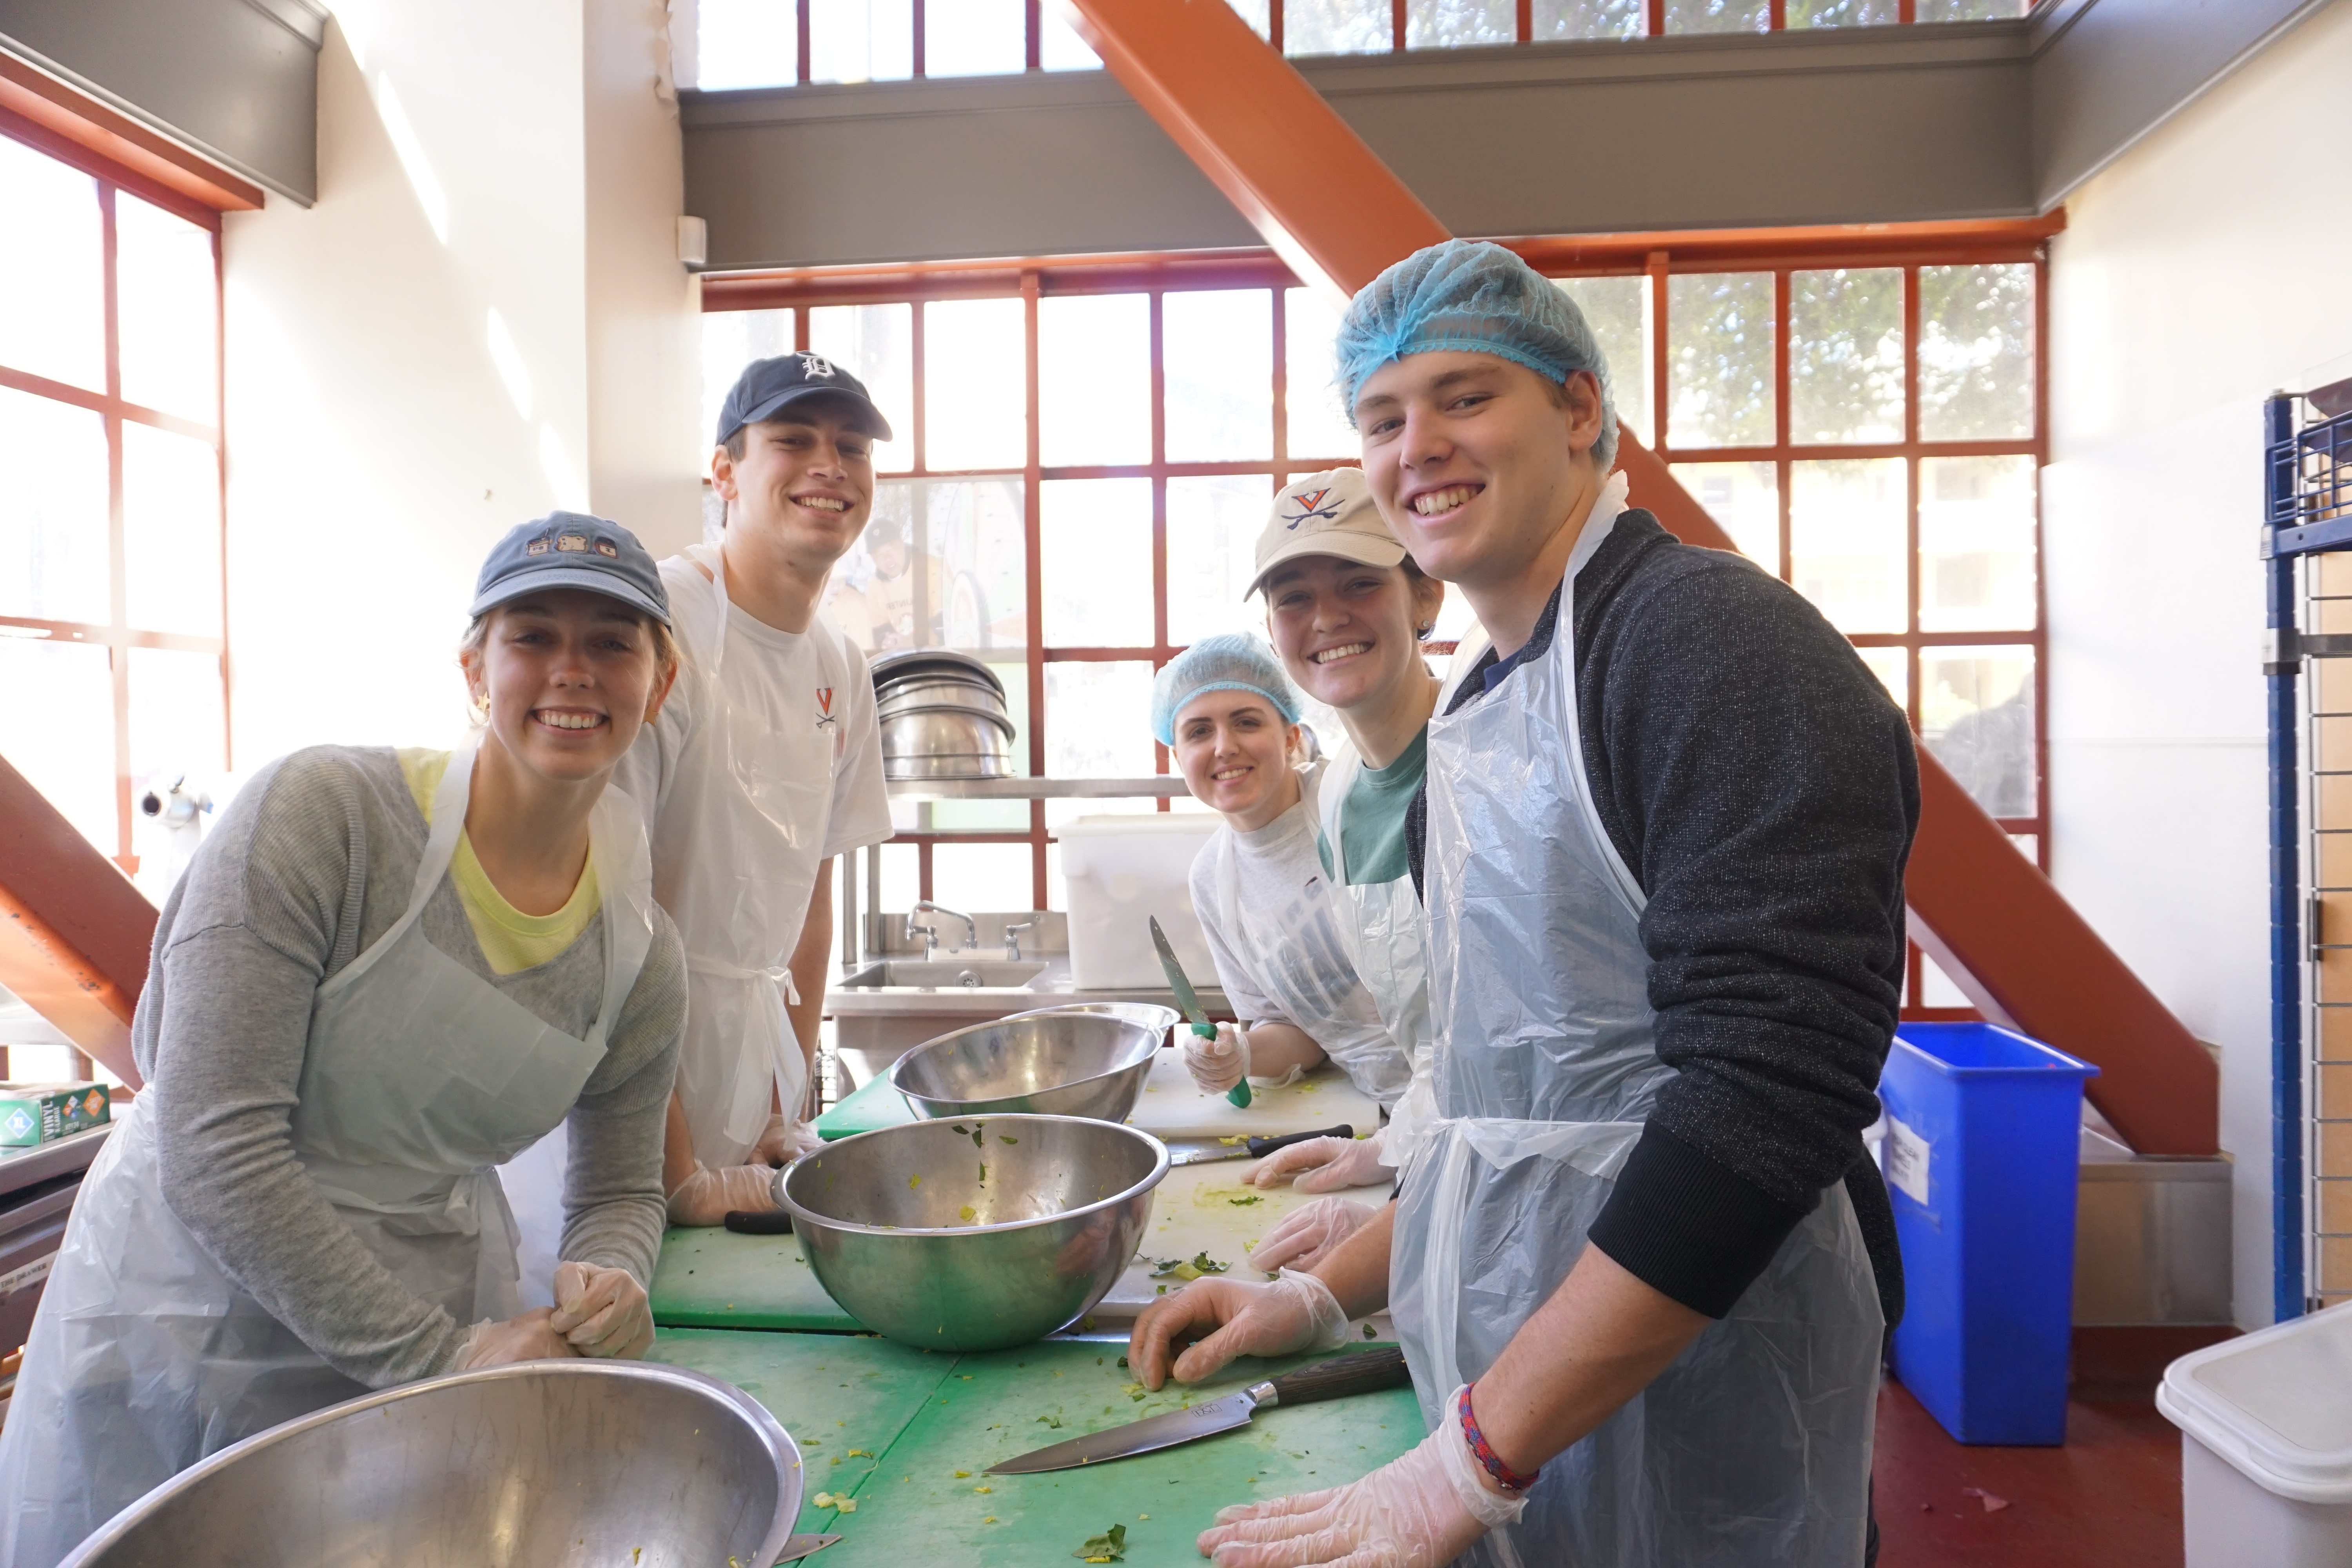 Students smile while preparing a meal